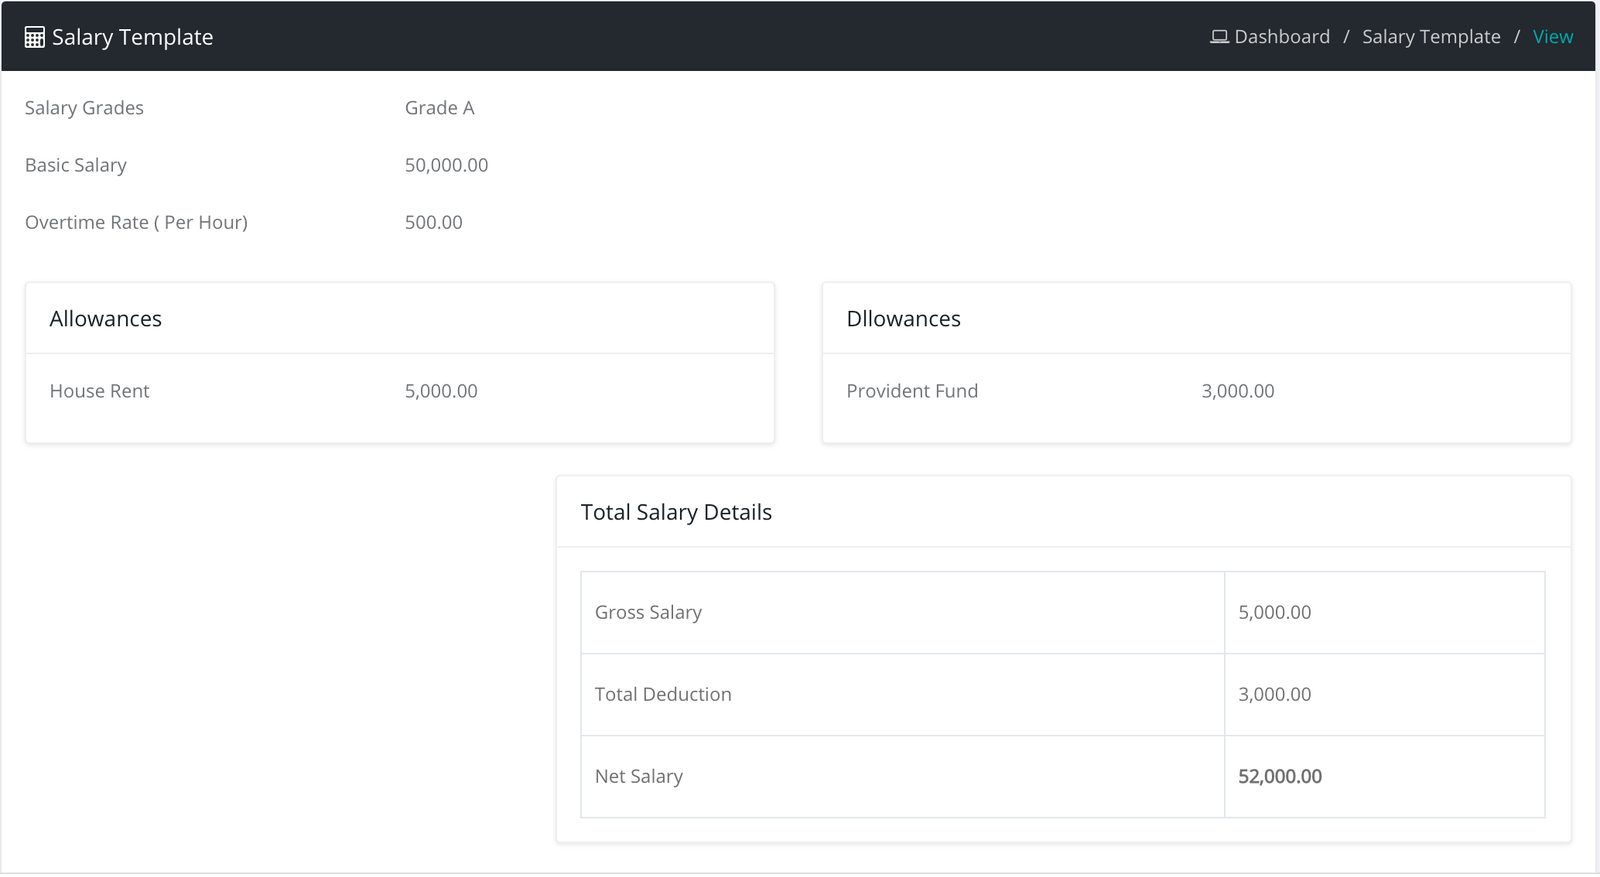 iNilabs School Management System Express - Stuffs Salary Template